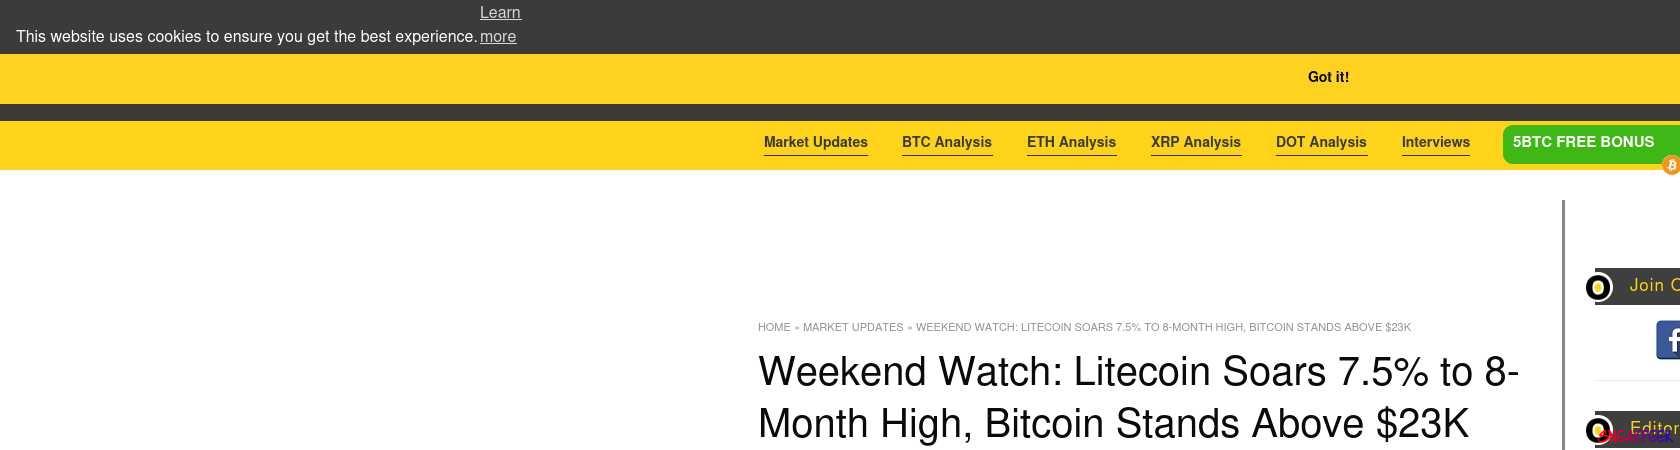 Read the full Article:  ⭲ Weekend Watch: Litecoin Soars 7.5% to 8-Month High, Bitcoin Stands Above $23K